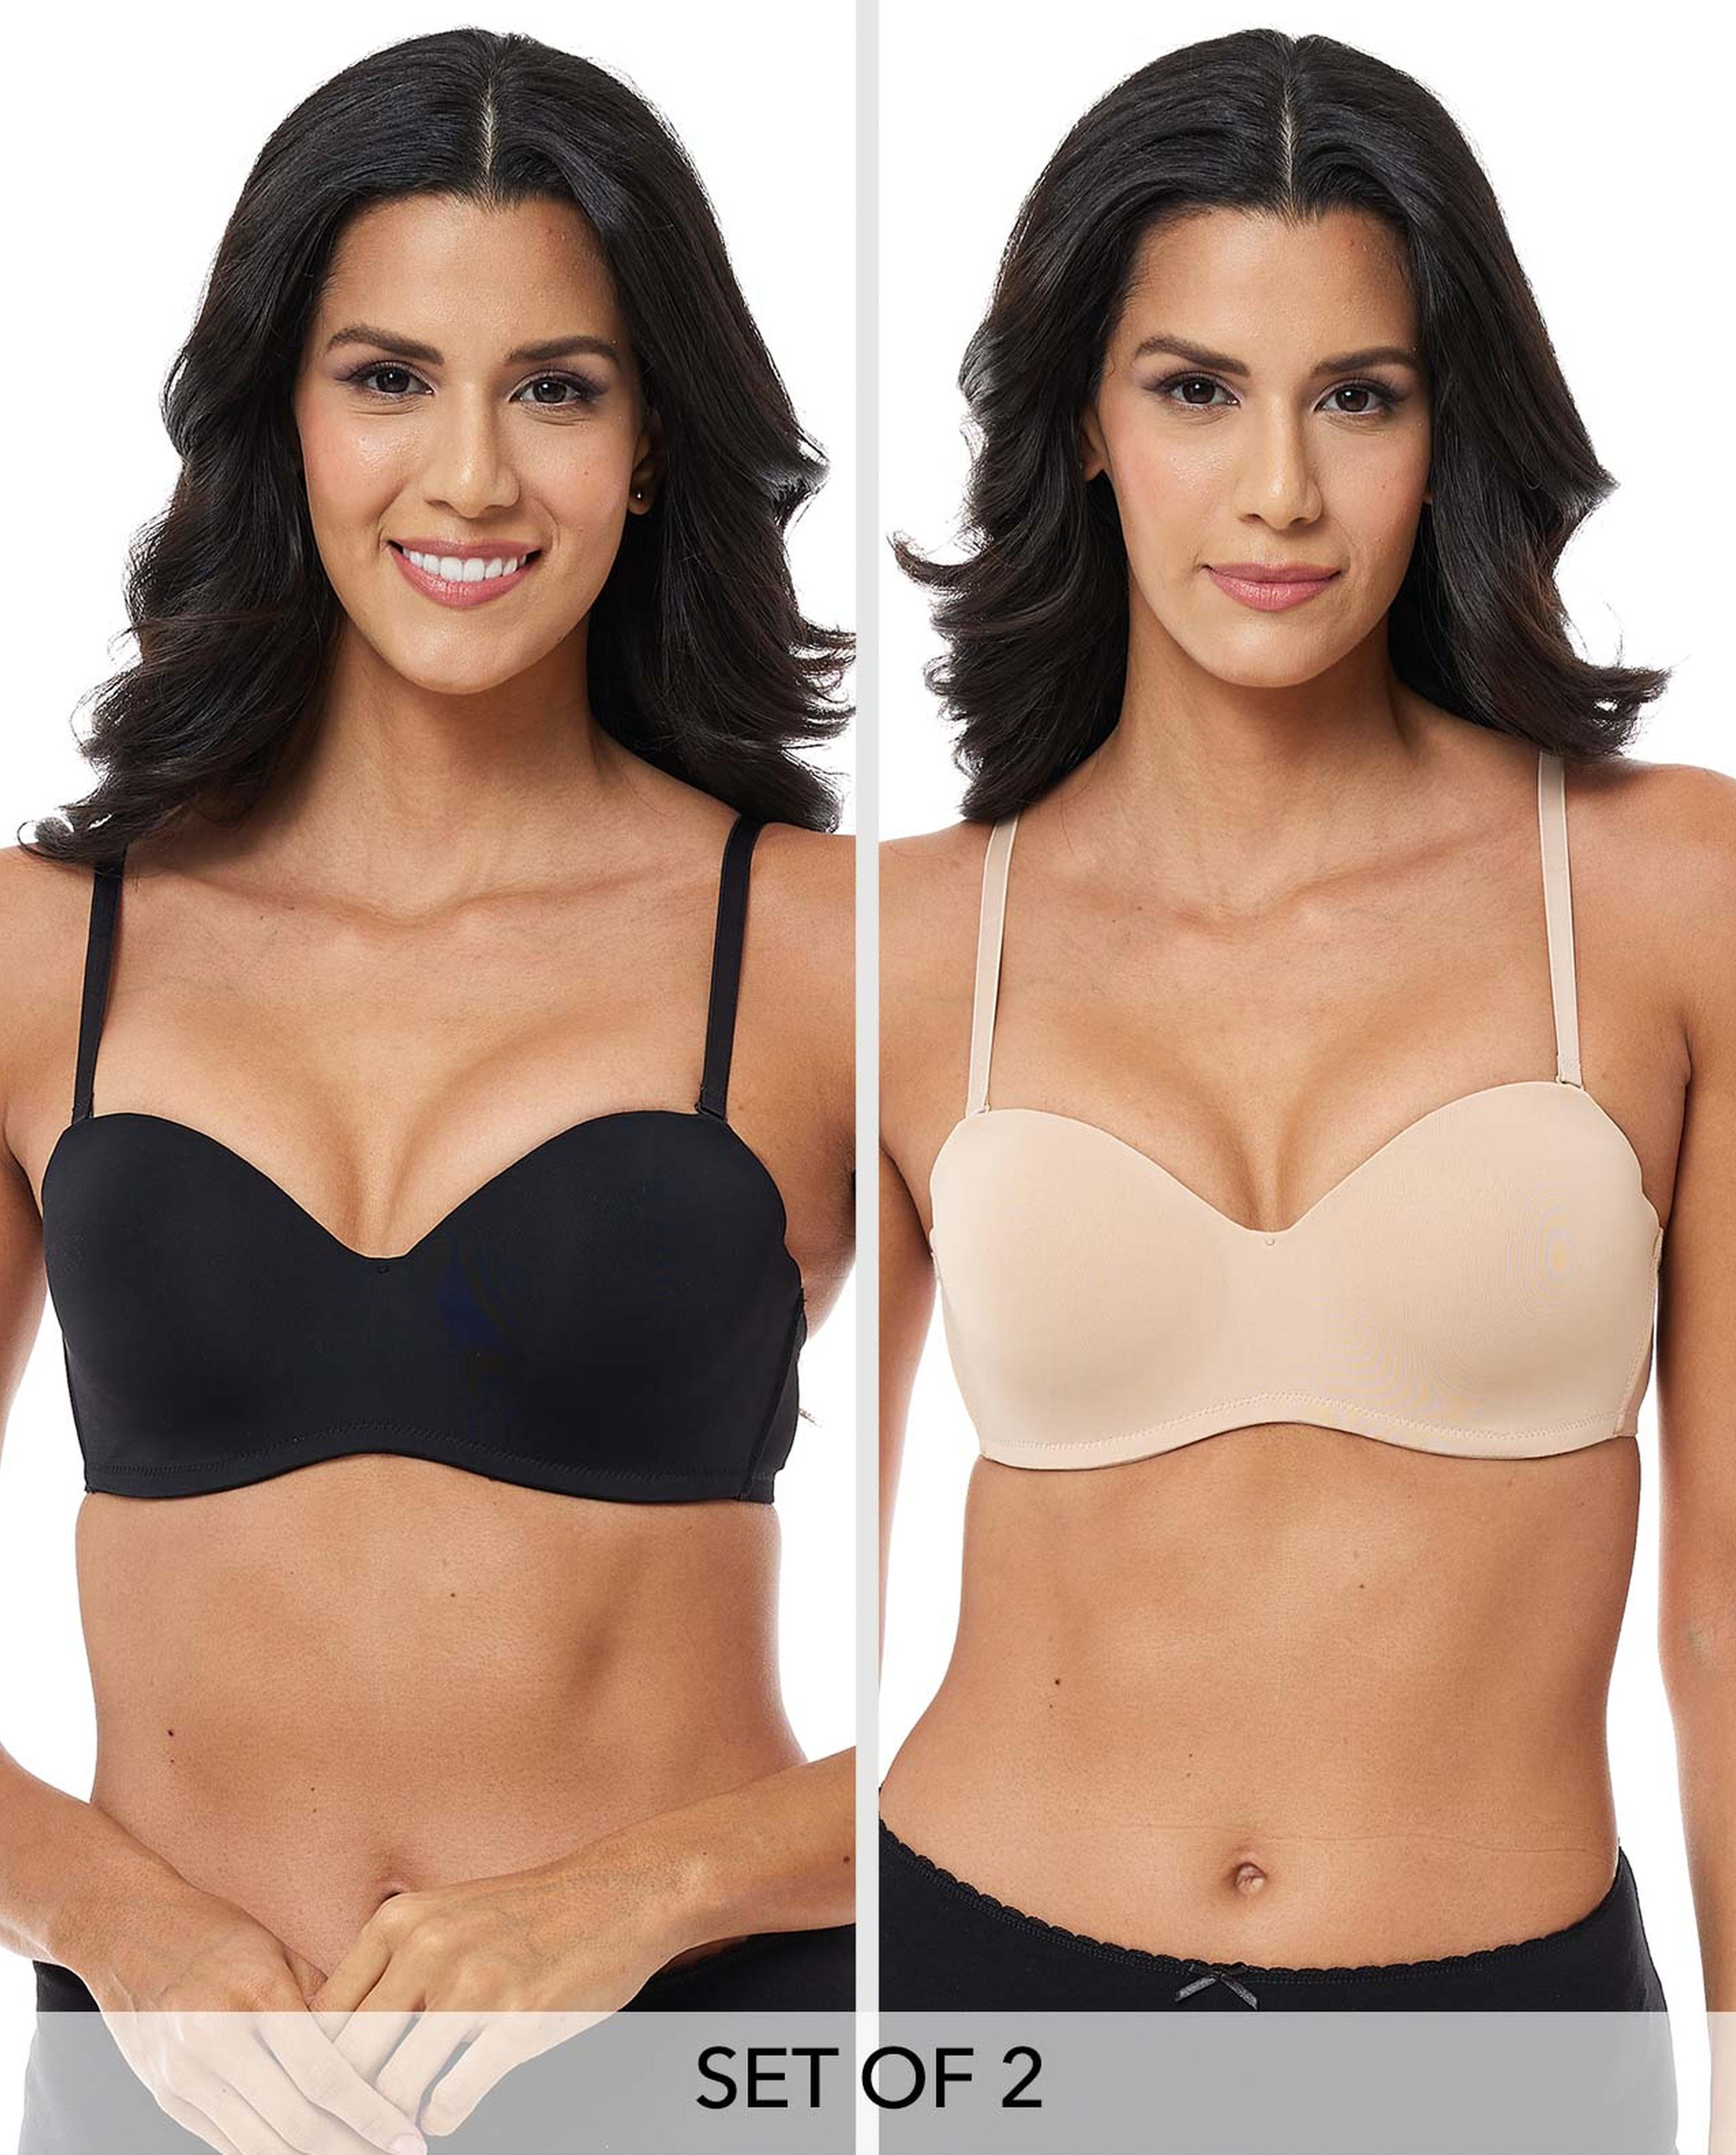 Bra By Padding: Shop for Bras by Padding Online